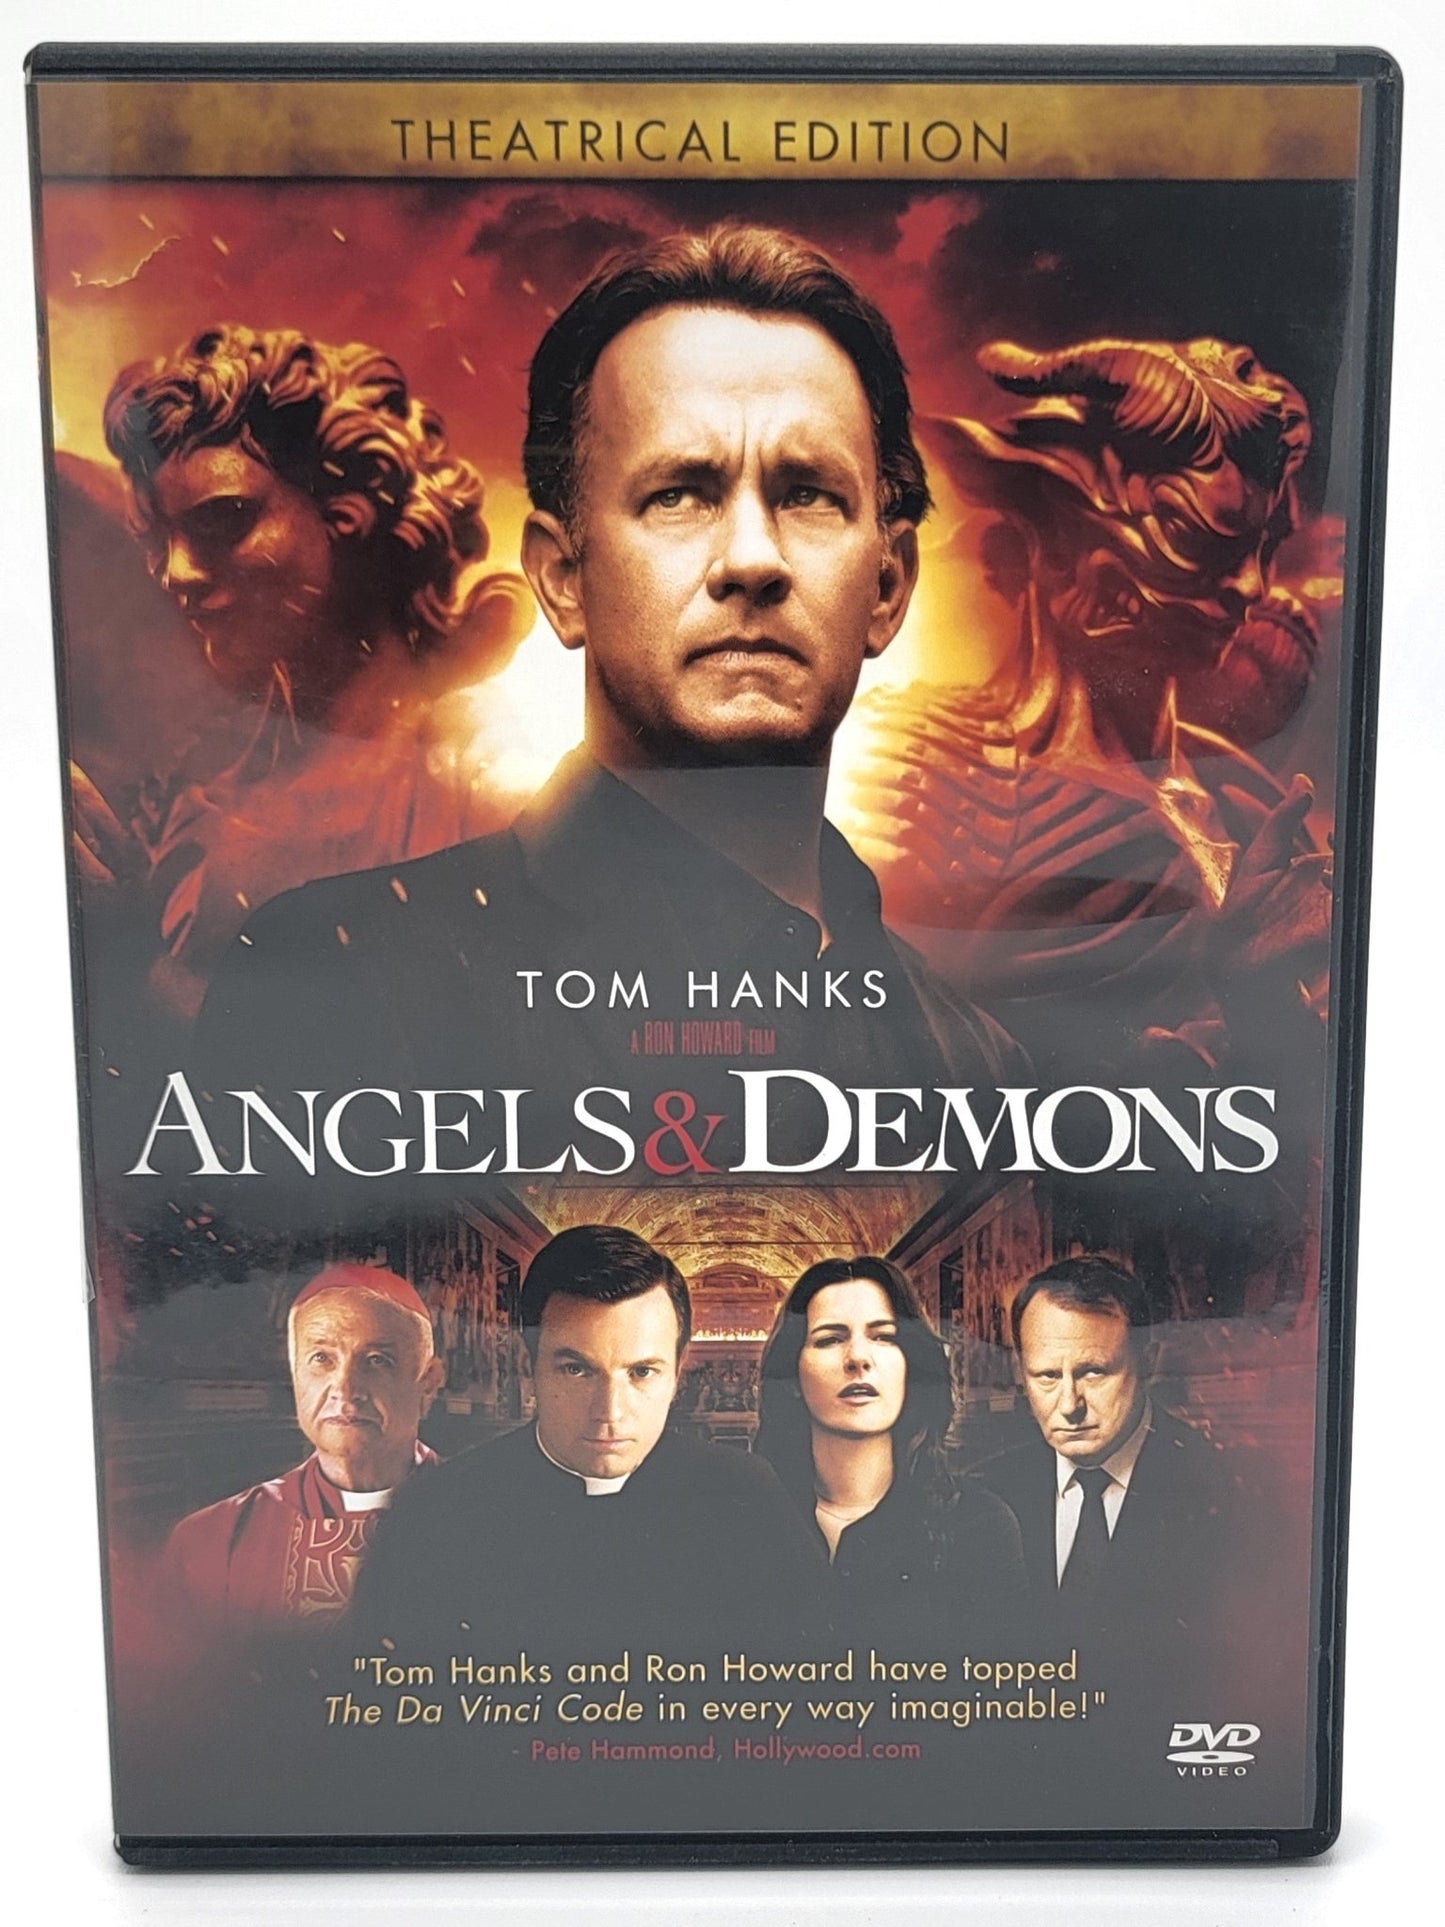 Columbia Pictures - Angels & Demons | DVD | Theatricial Edition - DVD - Steady Bunny Shop